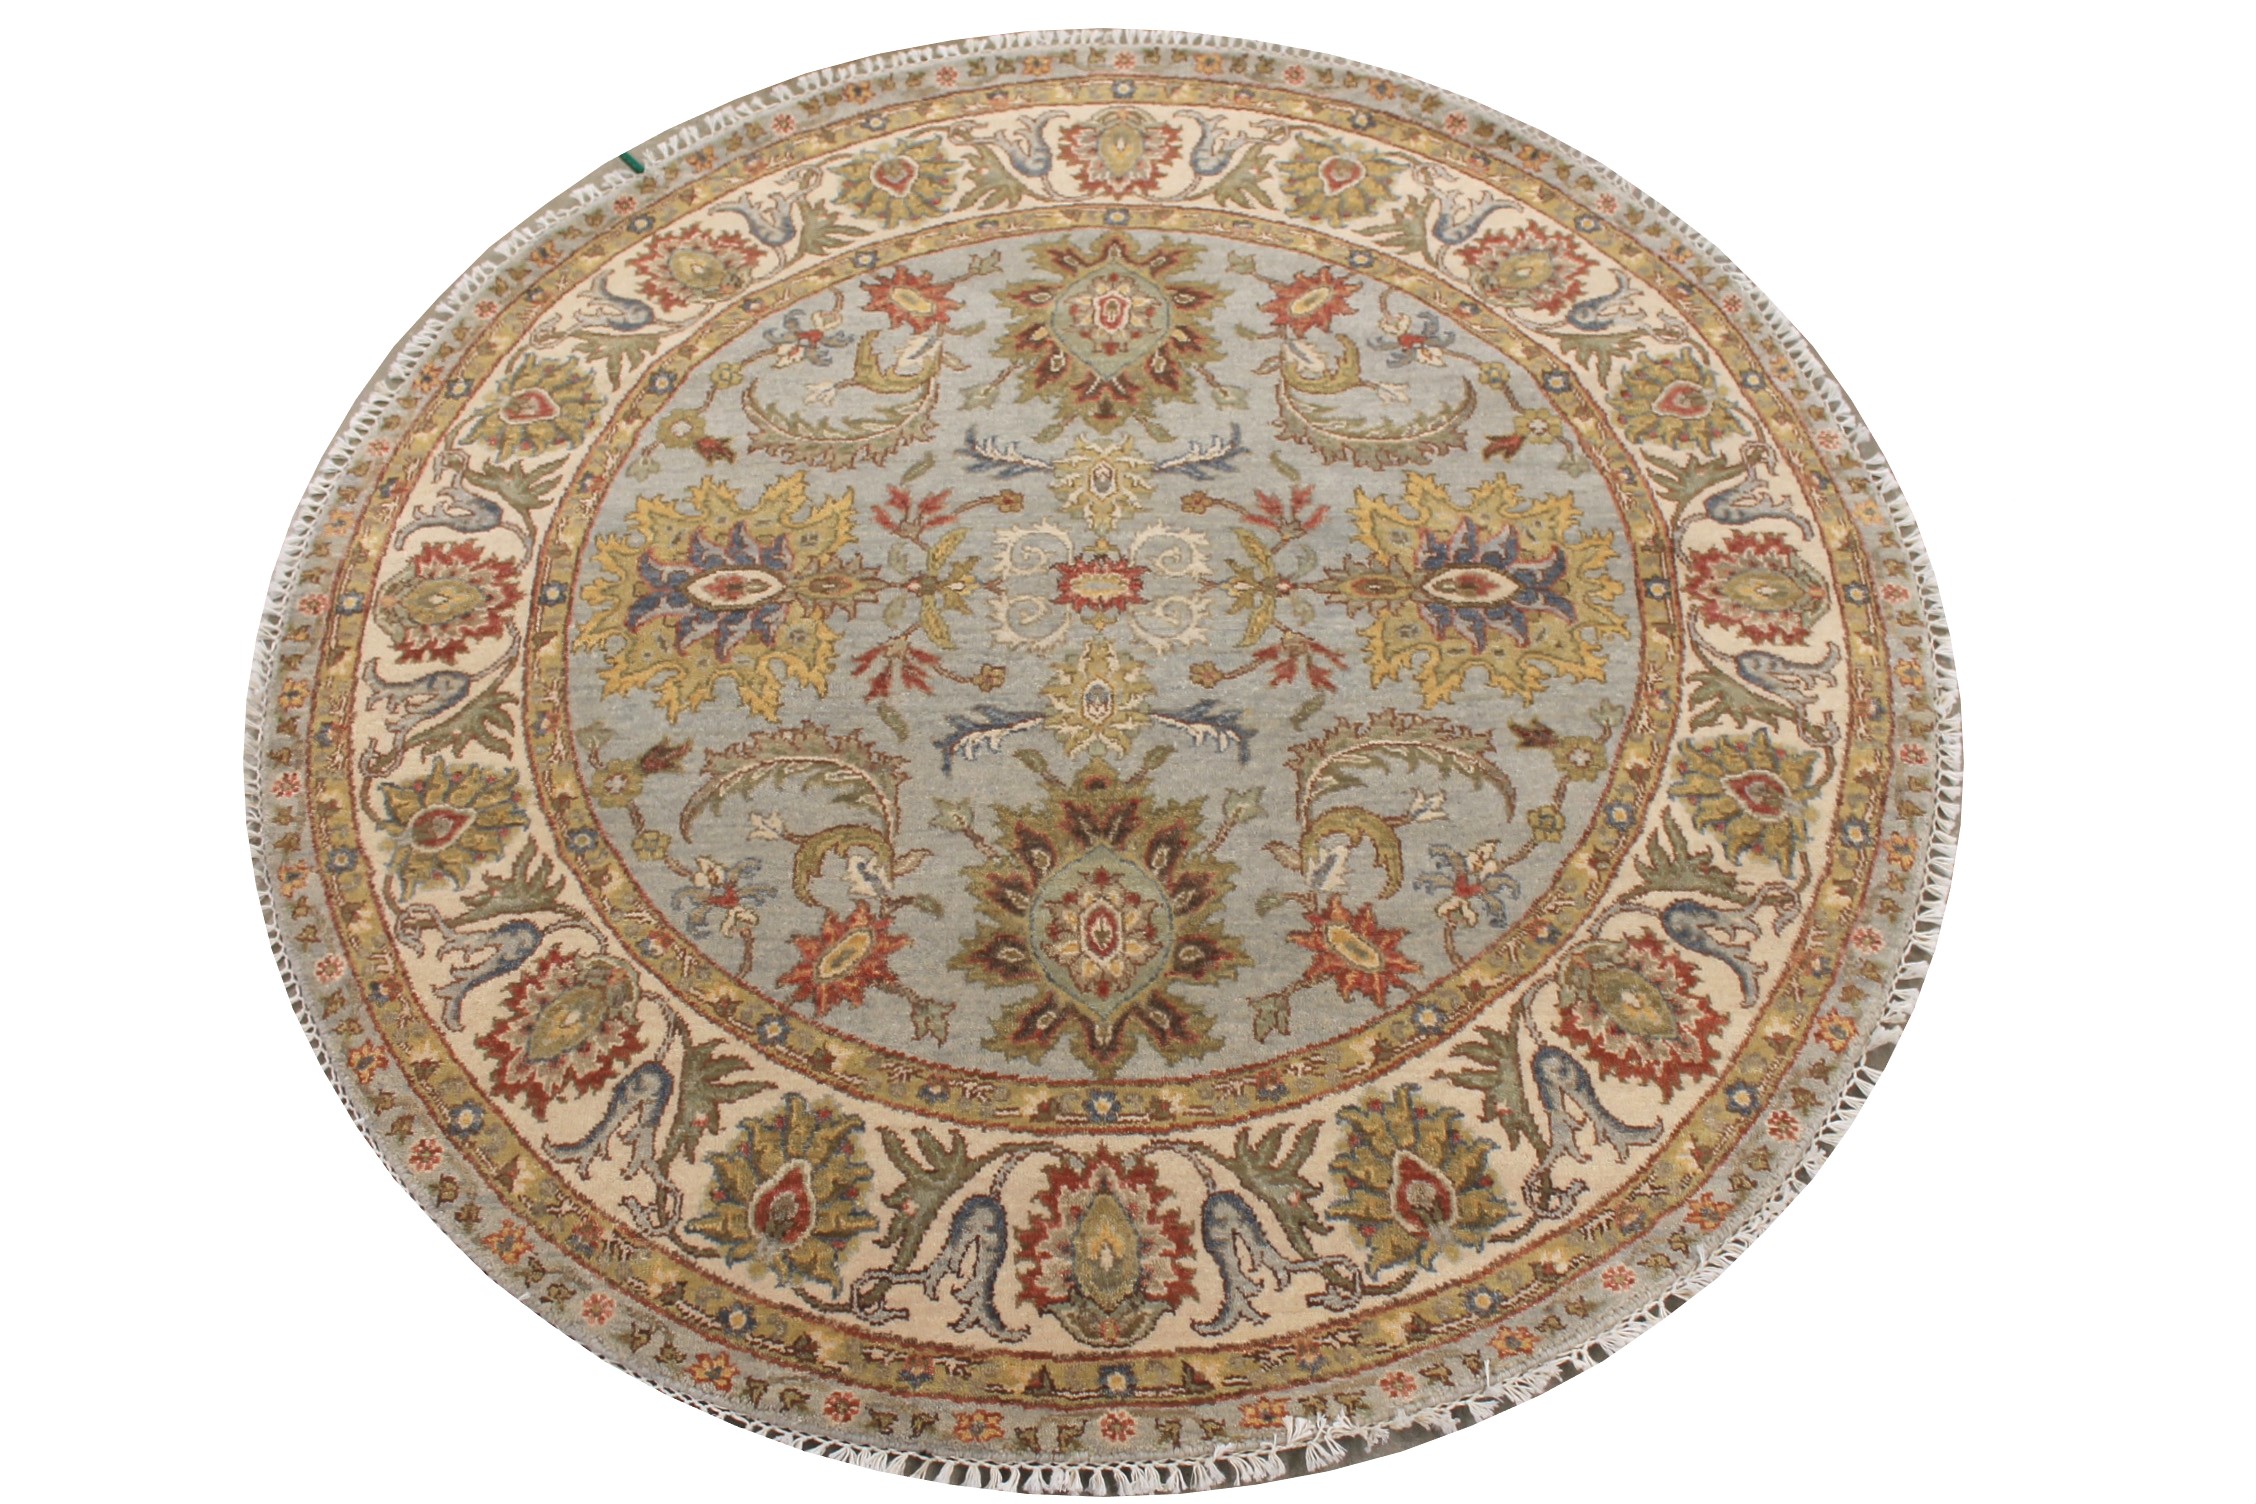 5 ft. Round & Square Traditional Hand Knotted Wool Area Rug - MR027879